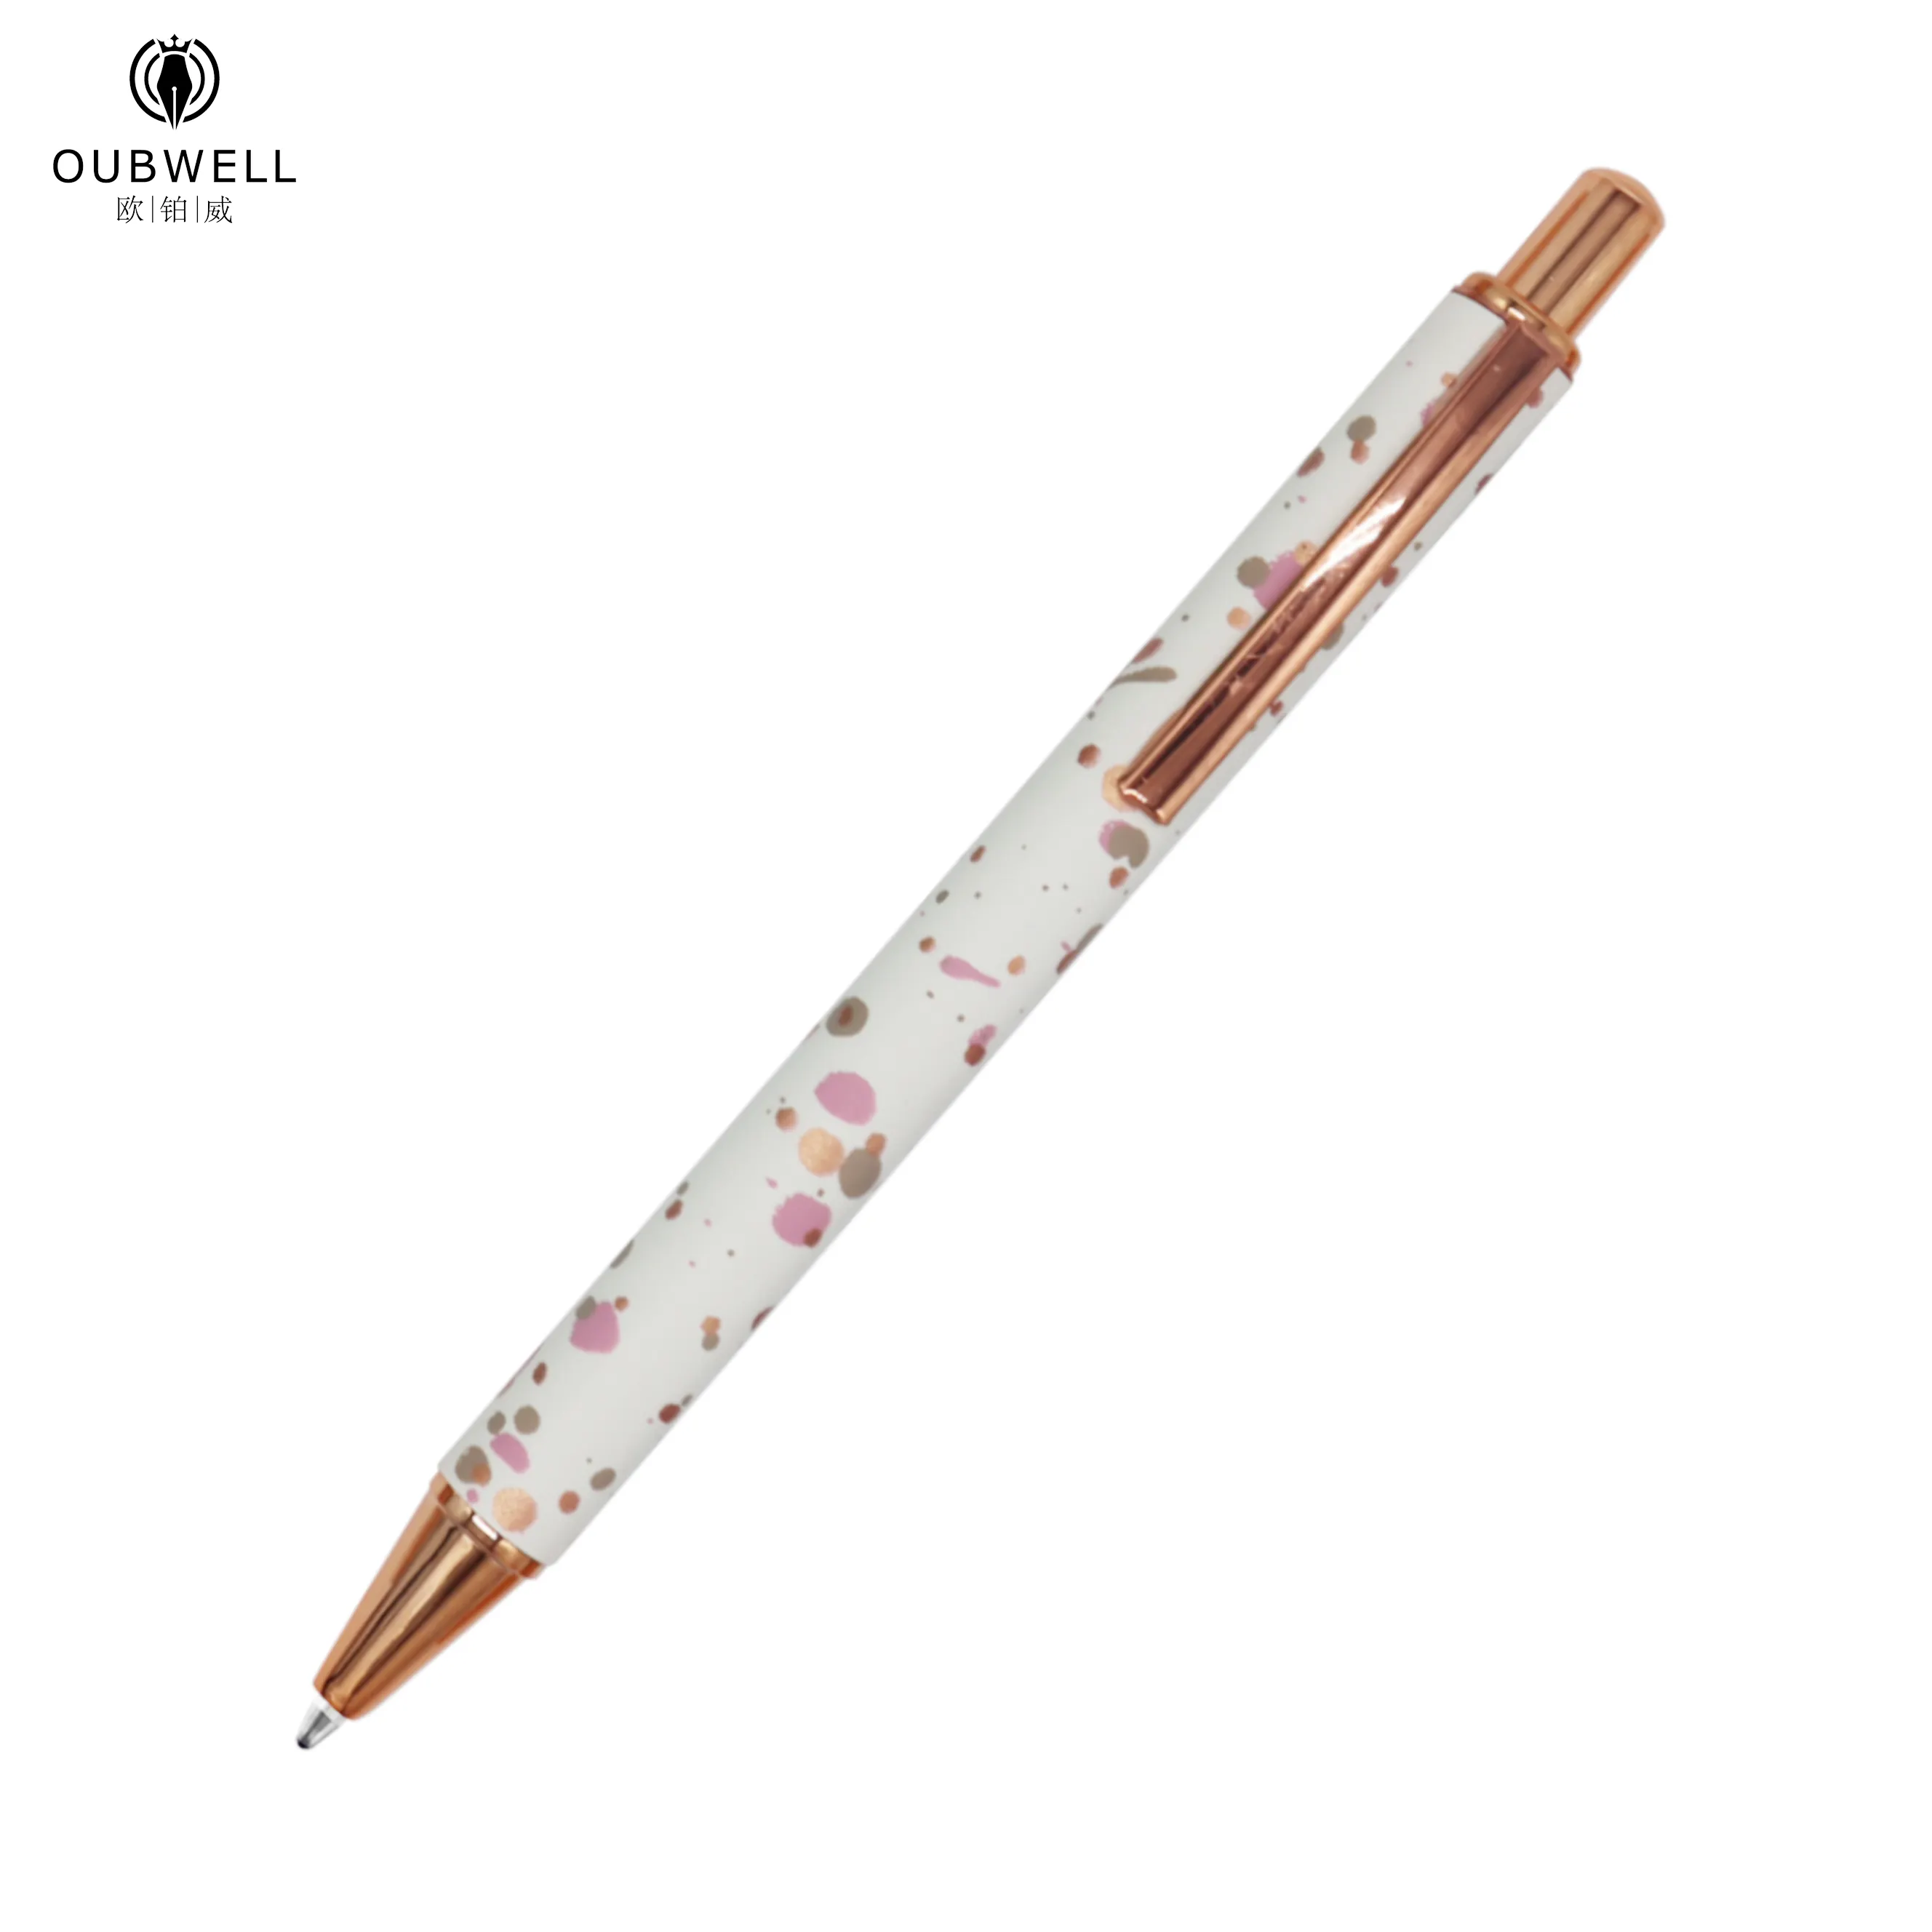 Personalized Gift Pen 2020 Pu Leather Pen Personalized Pen For Gift Metal Ballpoint Pen With Customized Leather